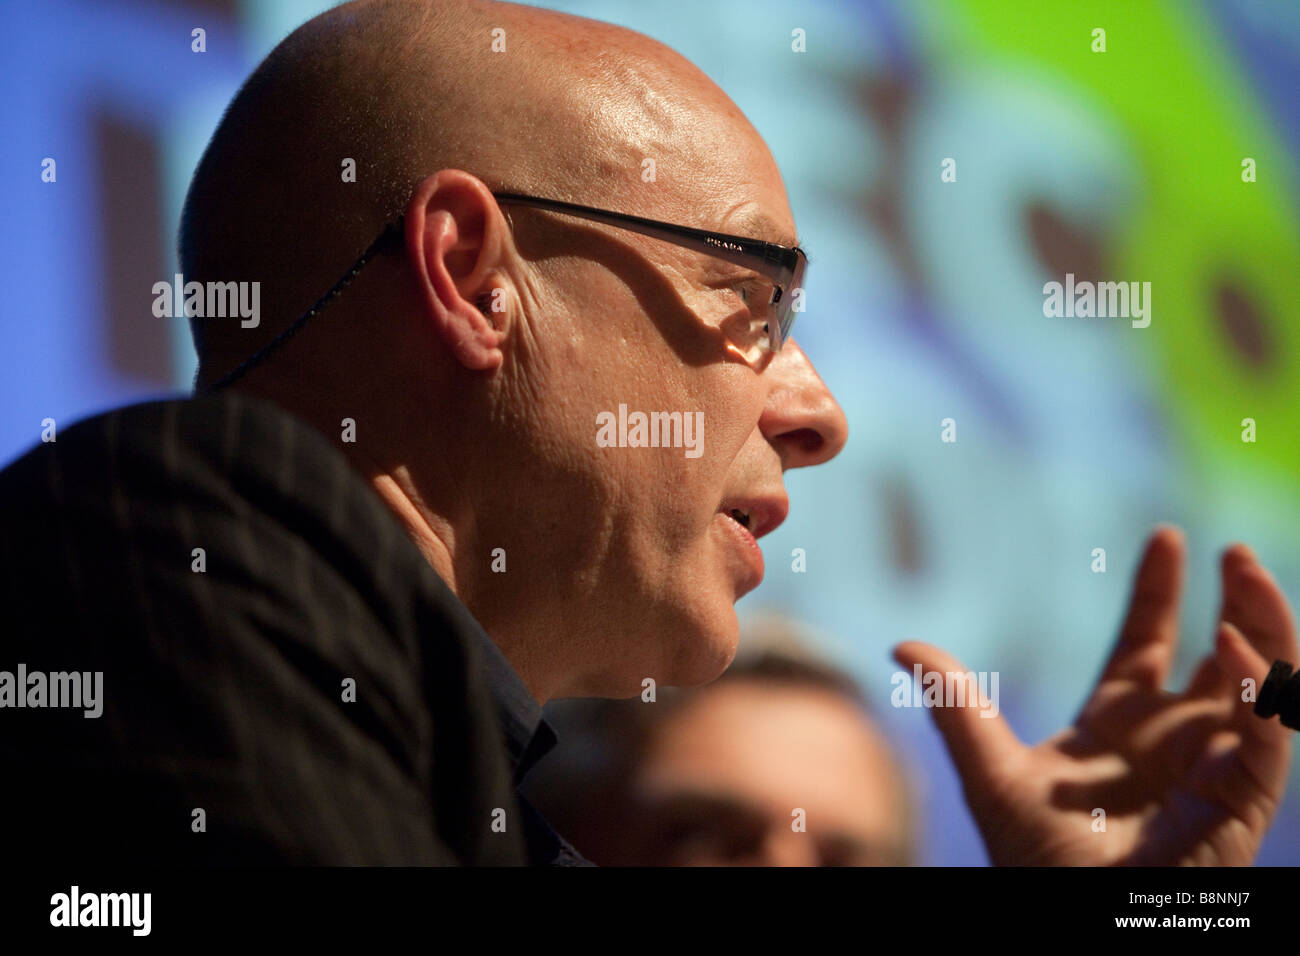 The Convention on Modern Liberty London England 28th February 2009 Brian Eno musician and campaigner Stock Photo